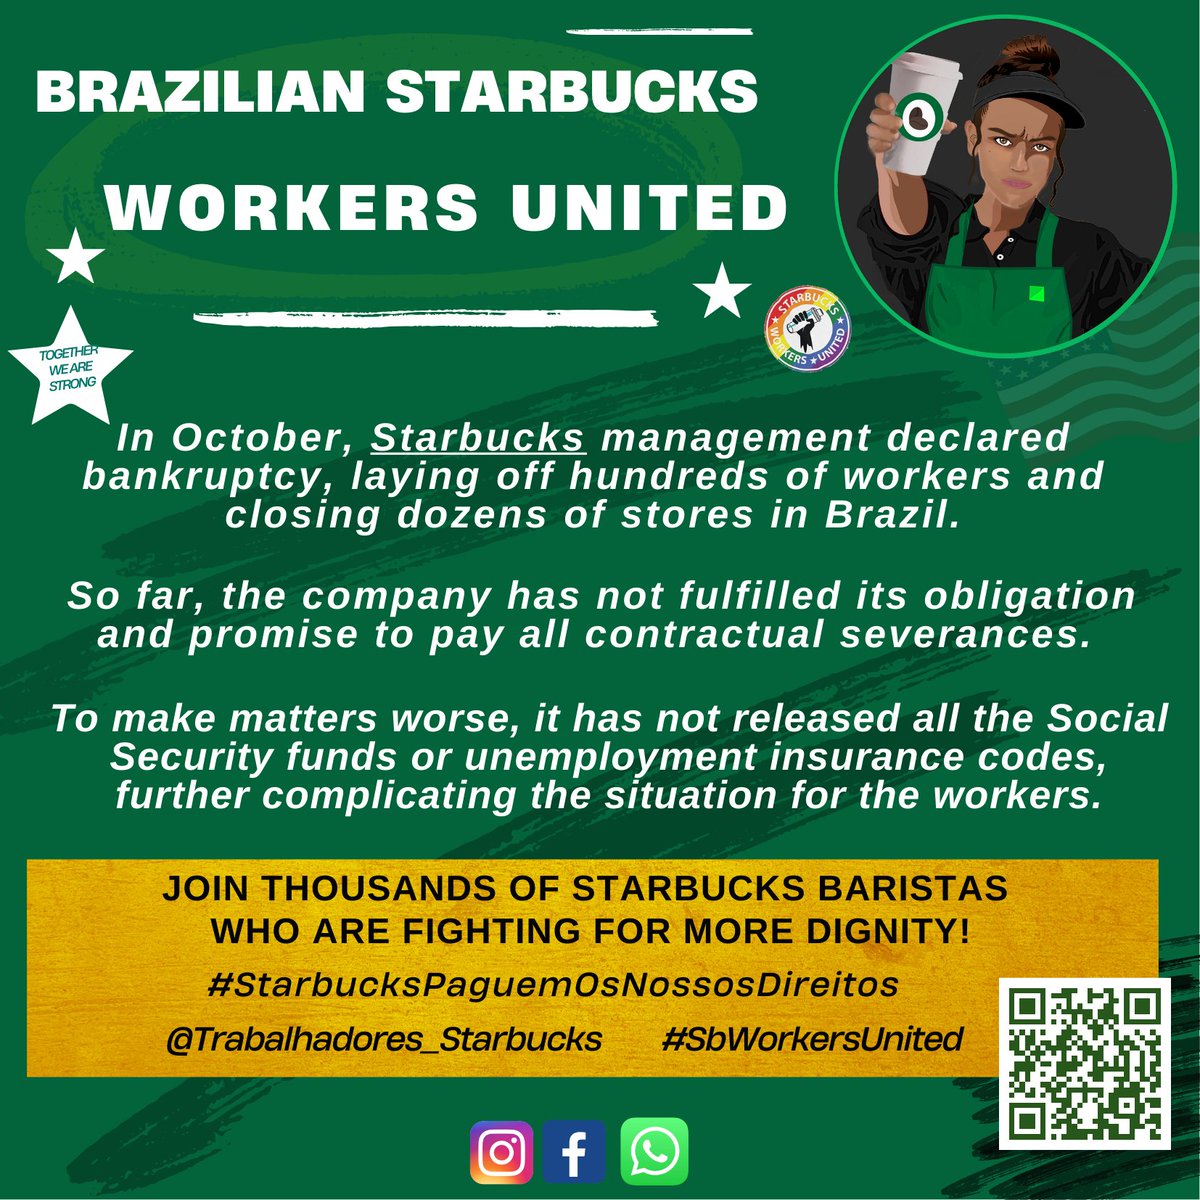 In October, Starbucks management declared bankruptcy, laying off hundreds of workers in Brazil. The company has not fulfilled its obligation and promise to pay all contractual severances. Join Starbucks baristas who are fighting for more dignity! @SBWorkersUnited @SEIU